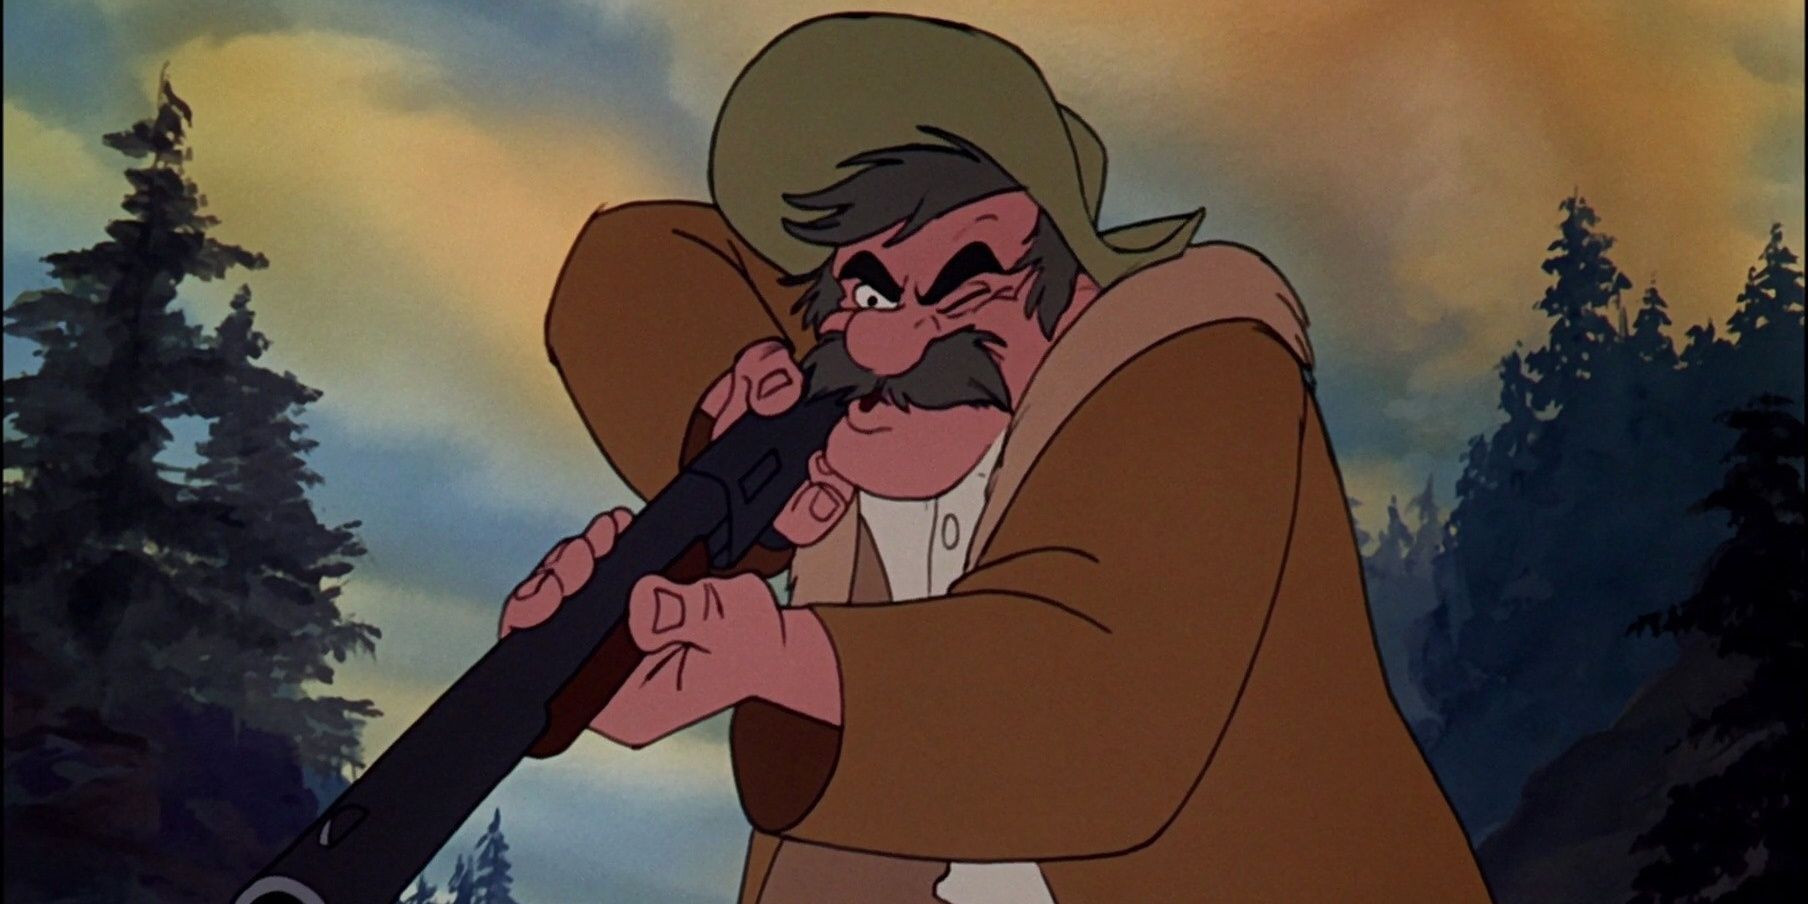 Amos Slade aiming his gun in The Fox And The Hound.